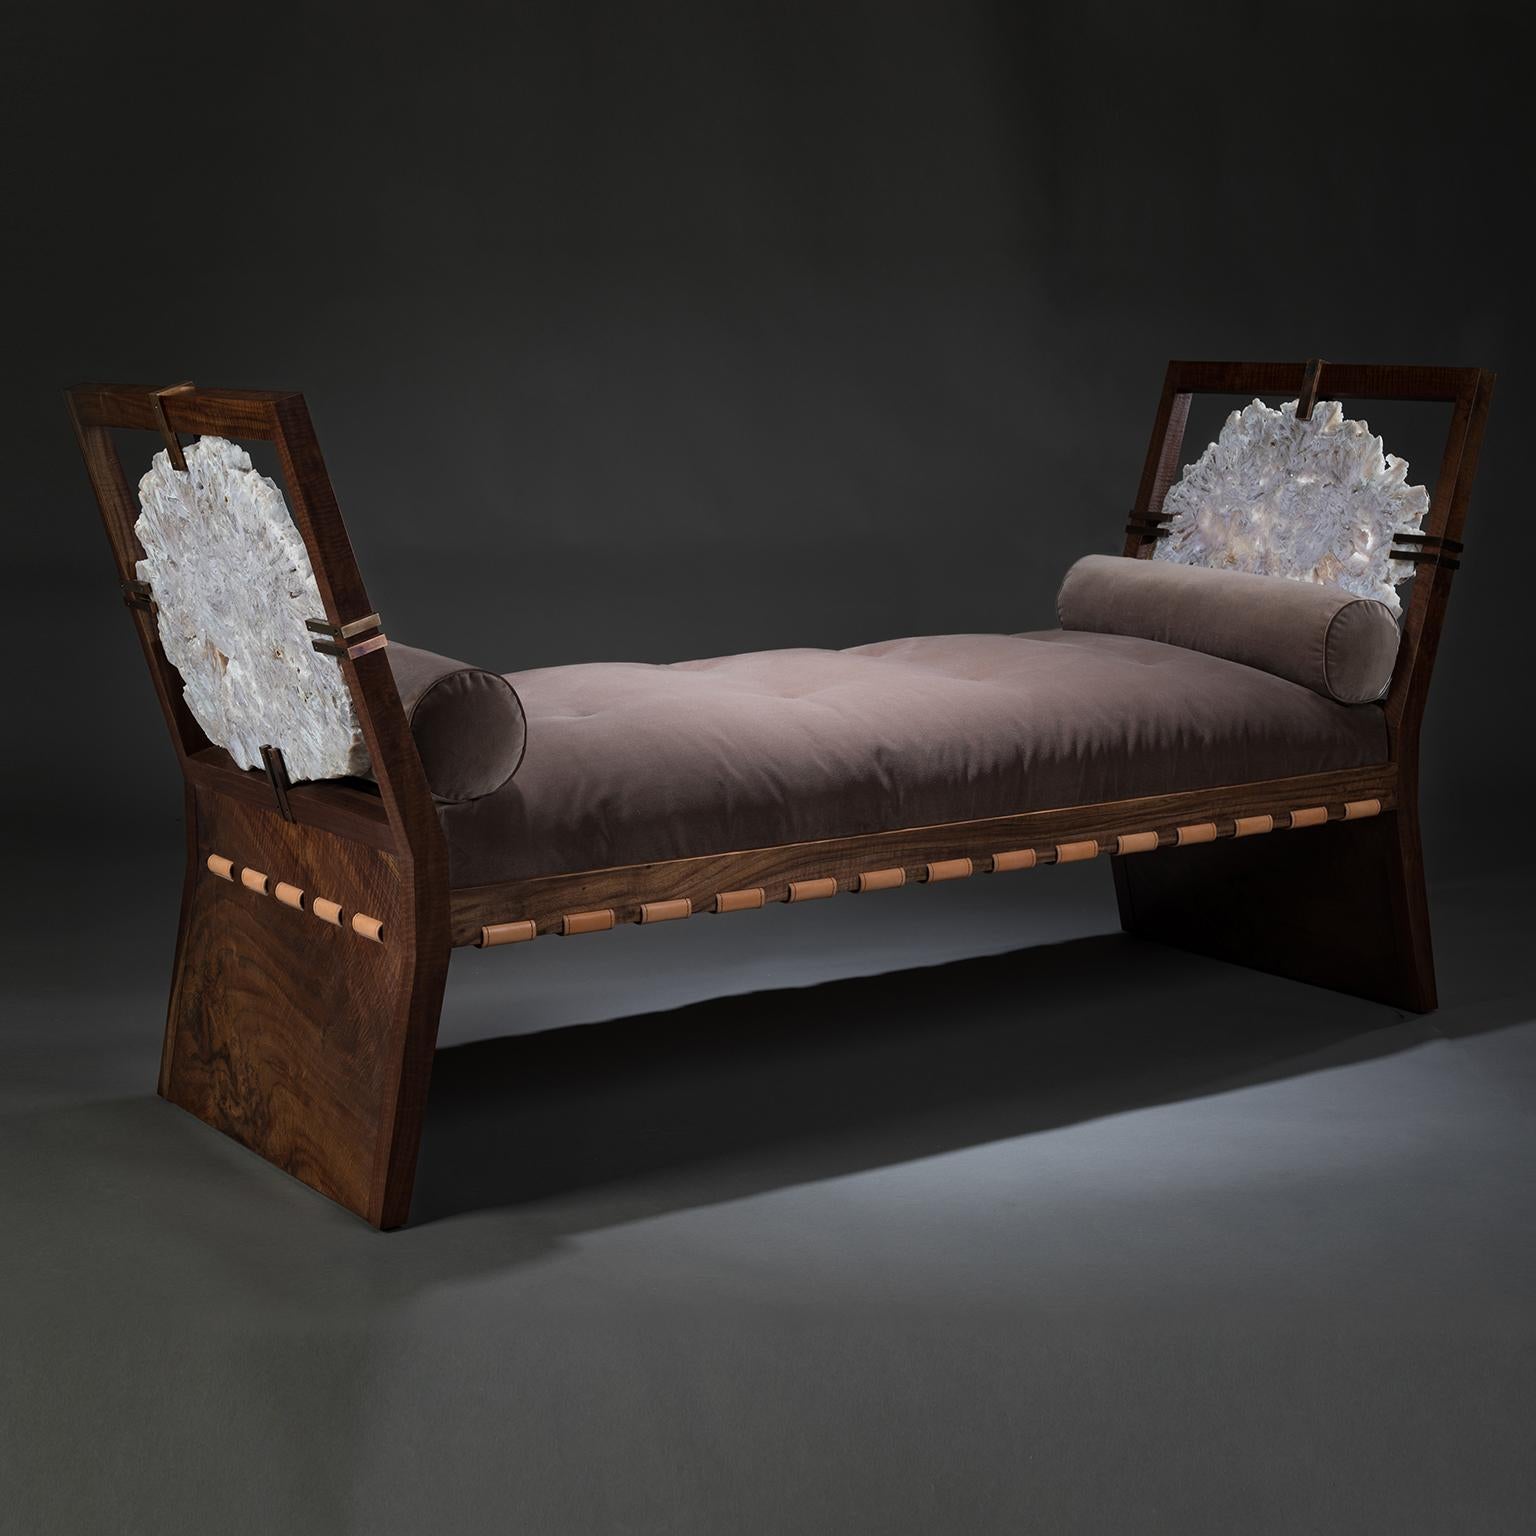 DAYBED

The daybed is as ancient as civilization. In Mediterranean regions, where wood was scarce, they were carved from stone with cloth pillows added for comfort. Studio Greytak’s daybed brings stone and wood together with a slight western flair.